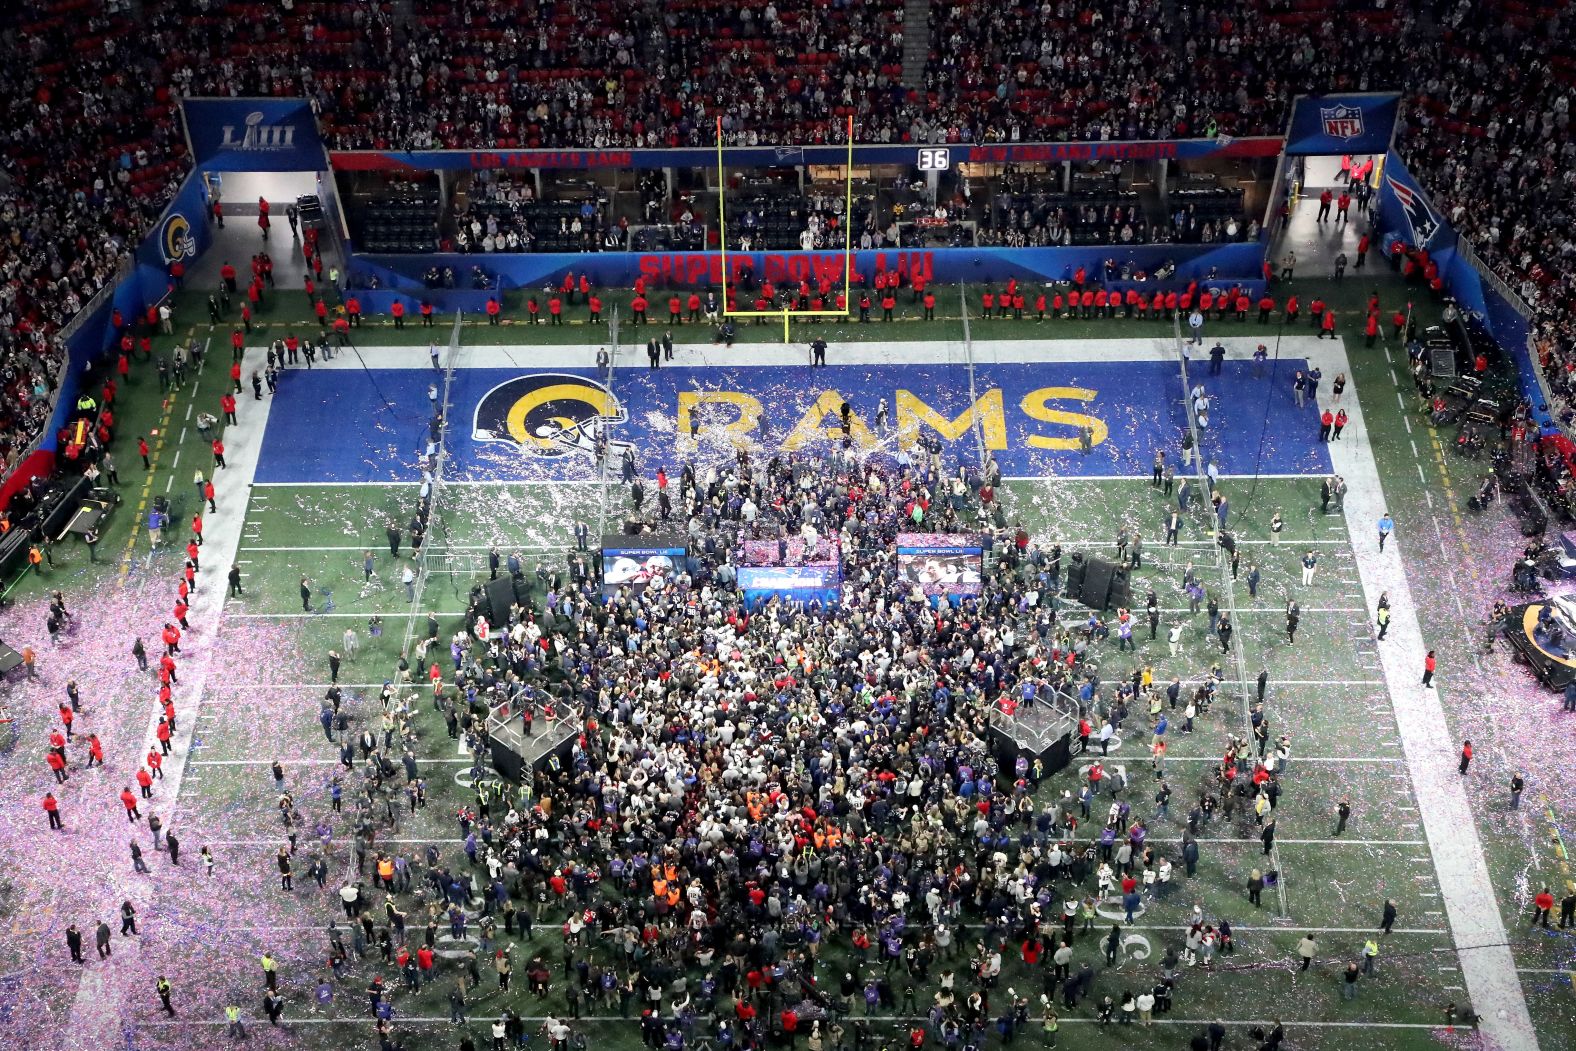 An overhead view of the postgame celebrations. The game was played at Mercedes-Benz Stadium in Atlanta.